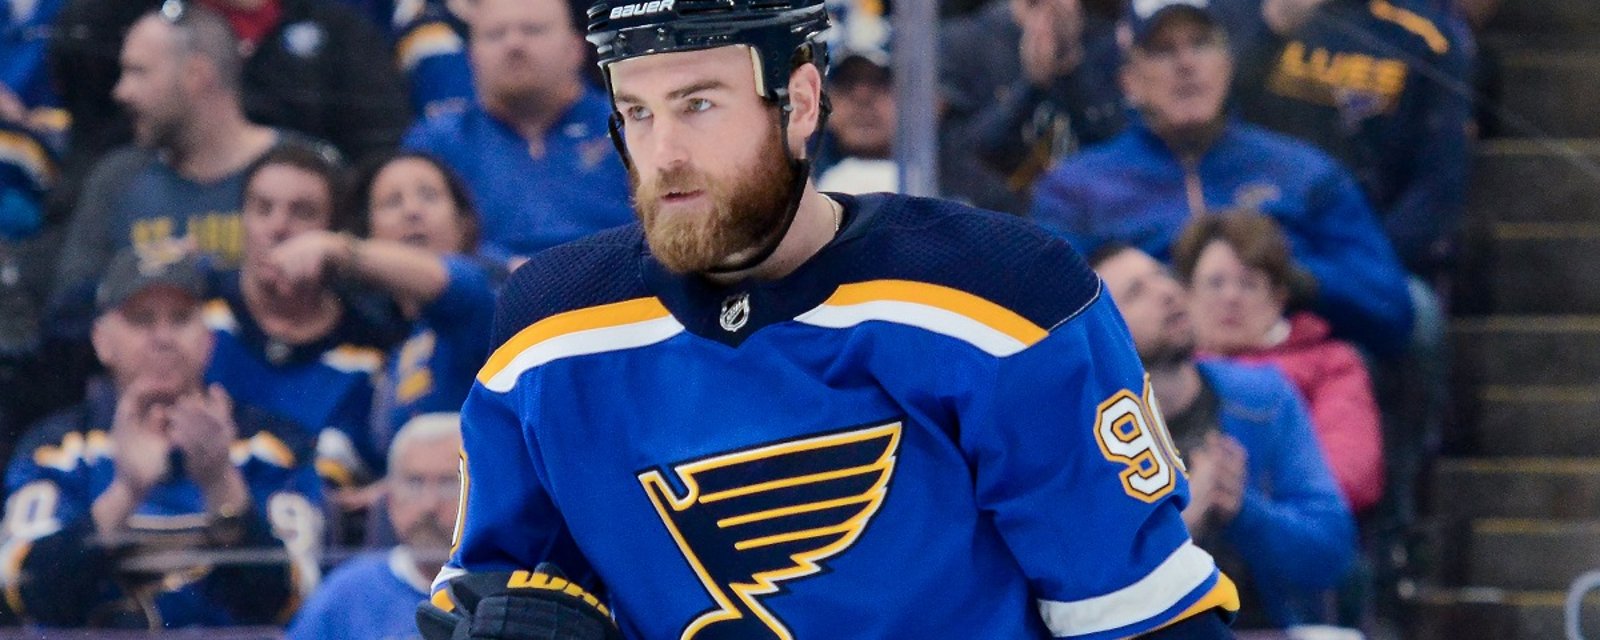 O'Reilly comments on possibly becoming the next captain of the St. Louis Blues.